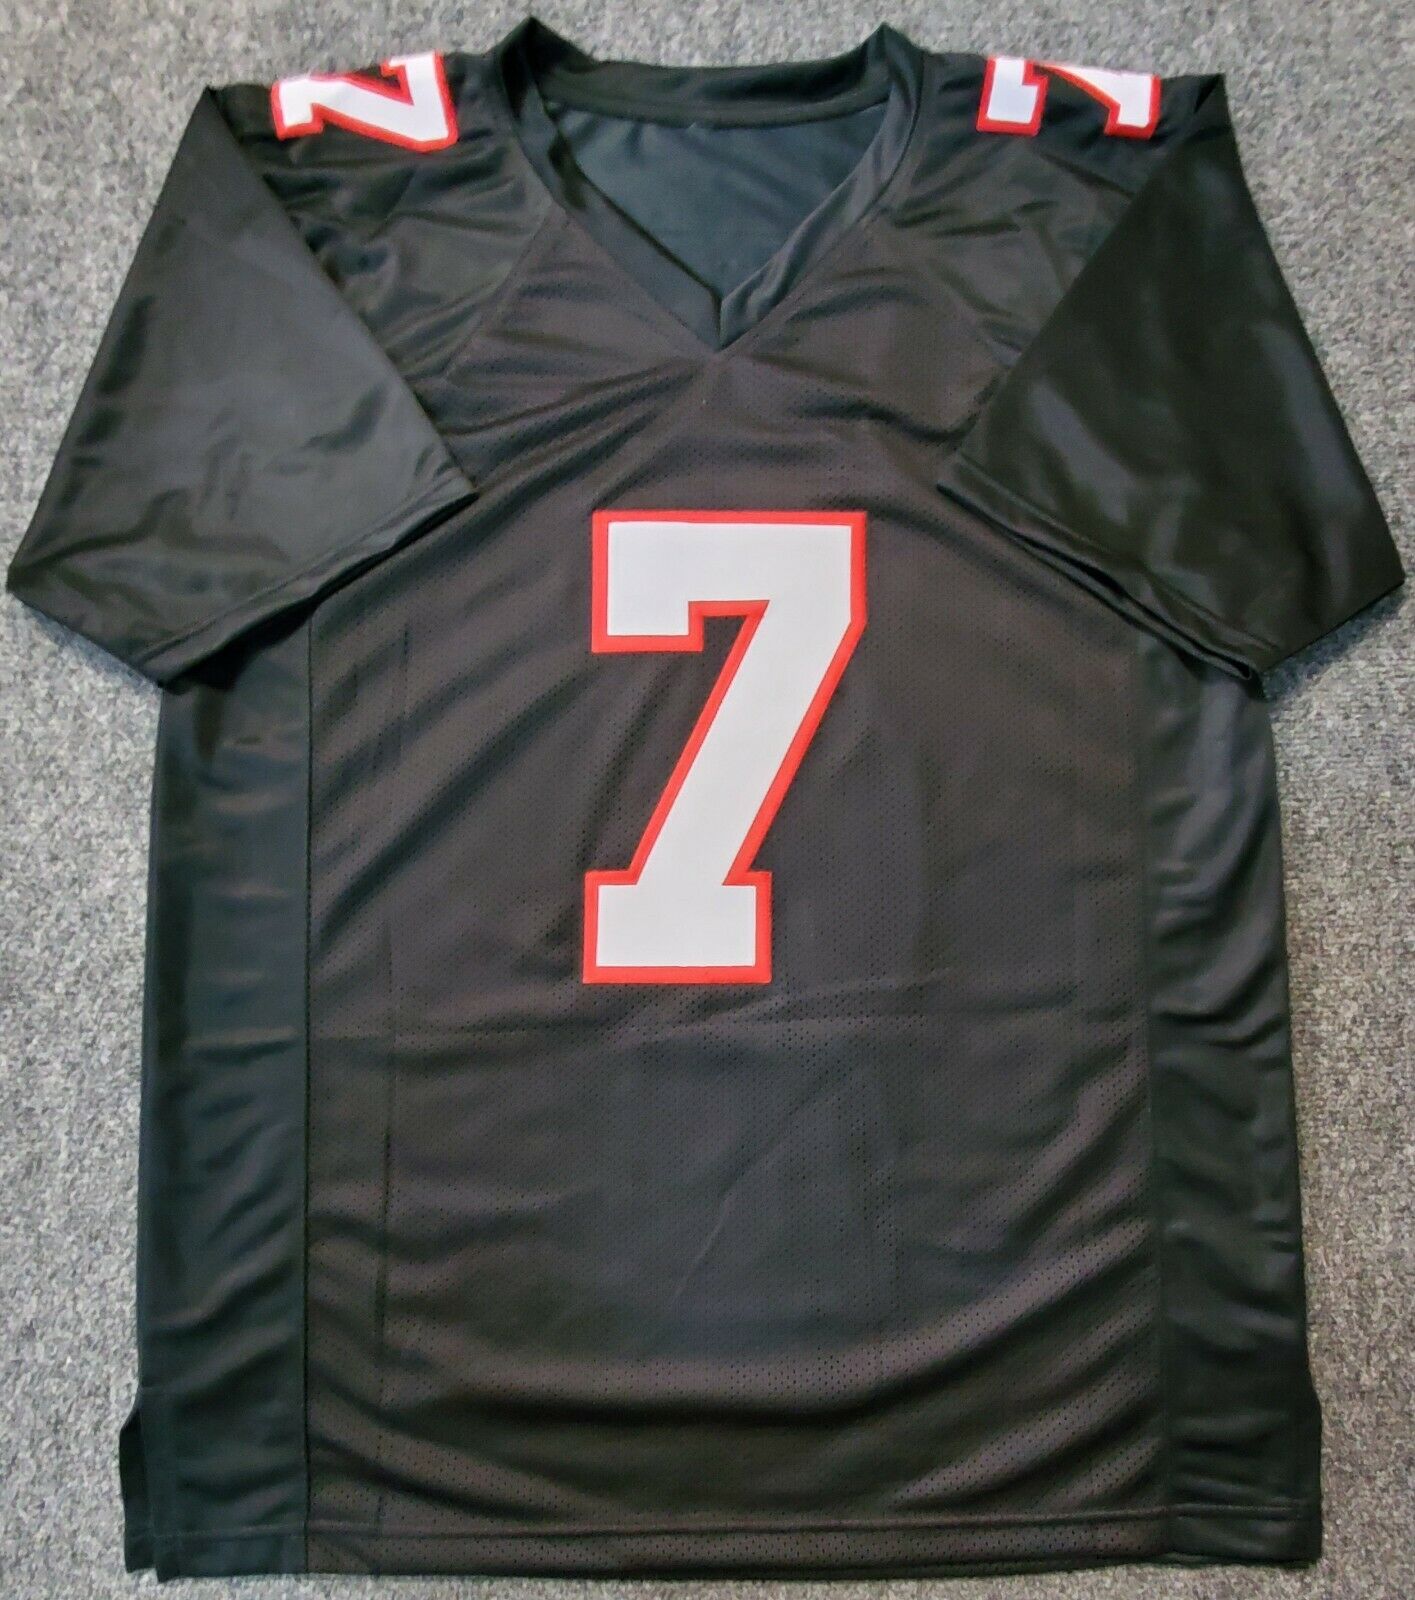 Michael Vick Jerseys Are Hot Sellers